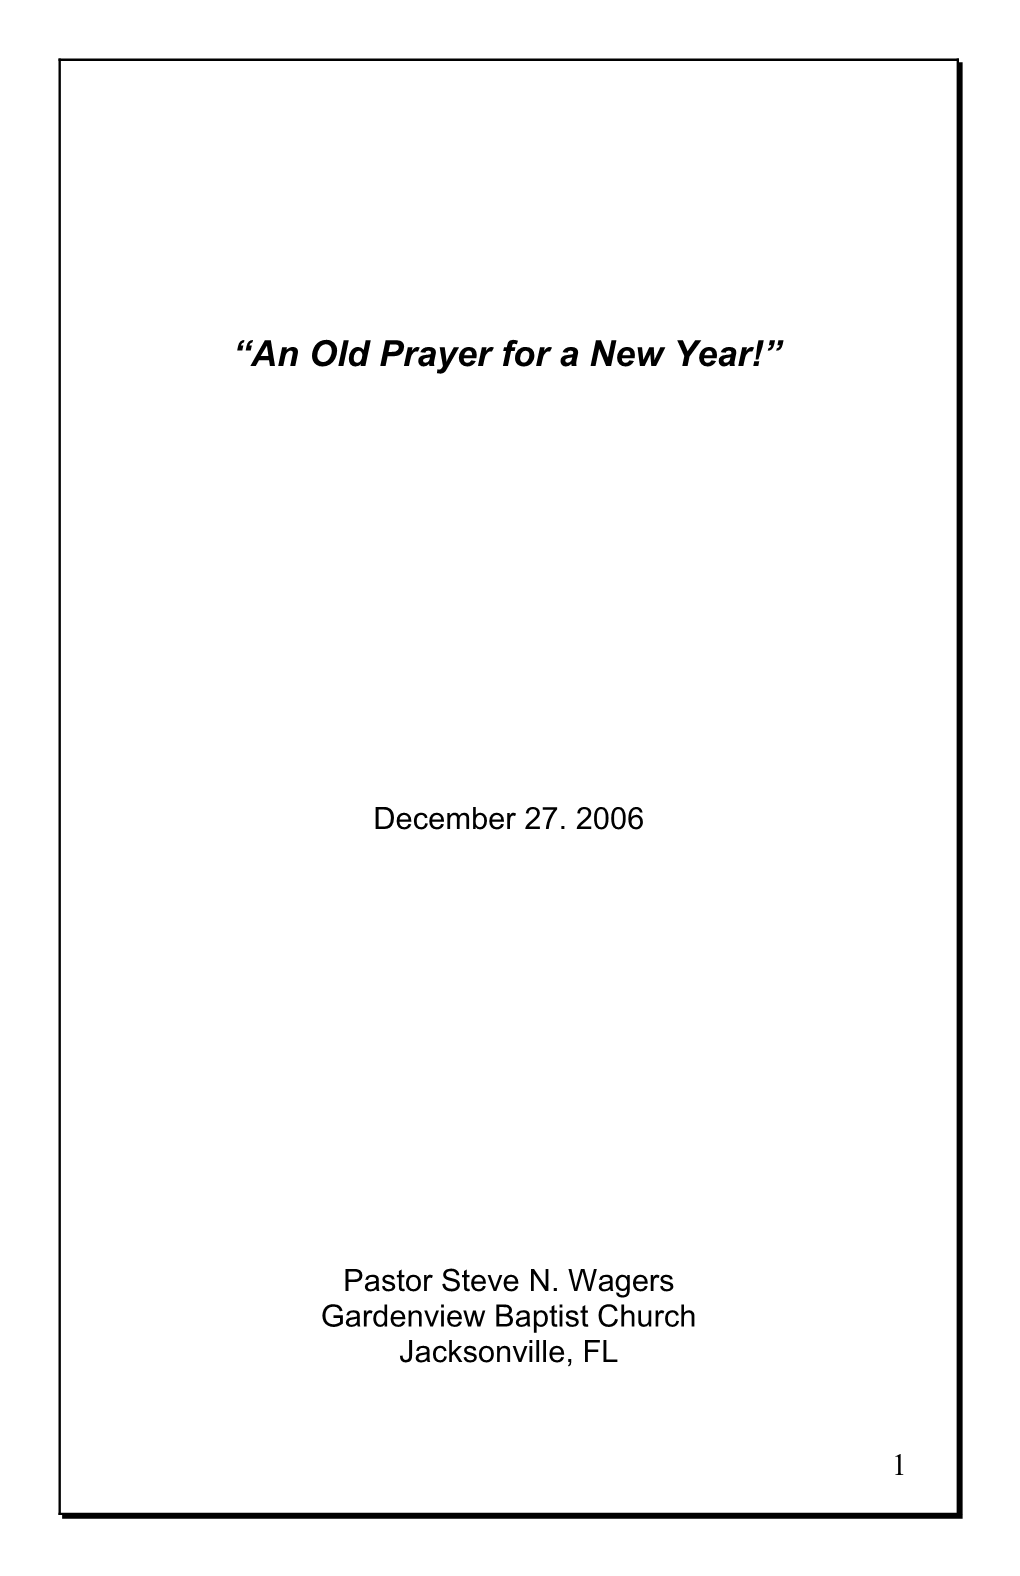 An Old Prayer for a New Year!